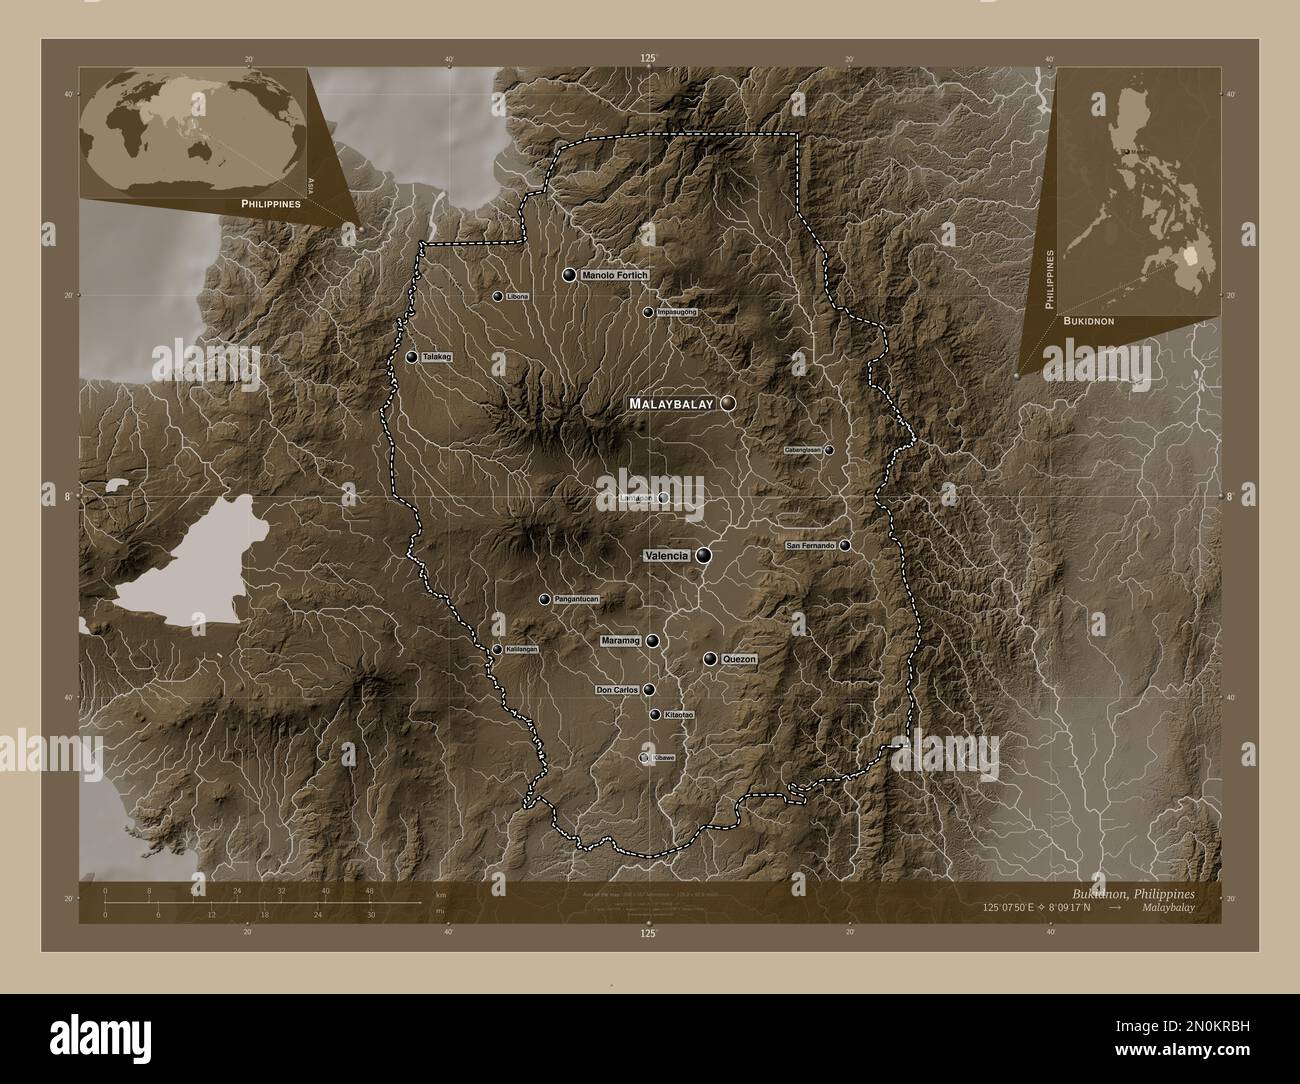 Bukidnon, province of Philippines. Elevation map colored in sepia tones with lakes and rivers. Locations and names of major cities of the region. Corn Stock Photo